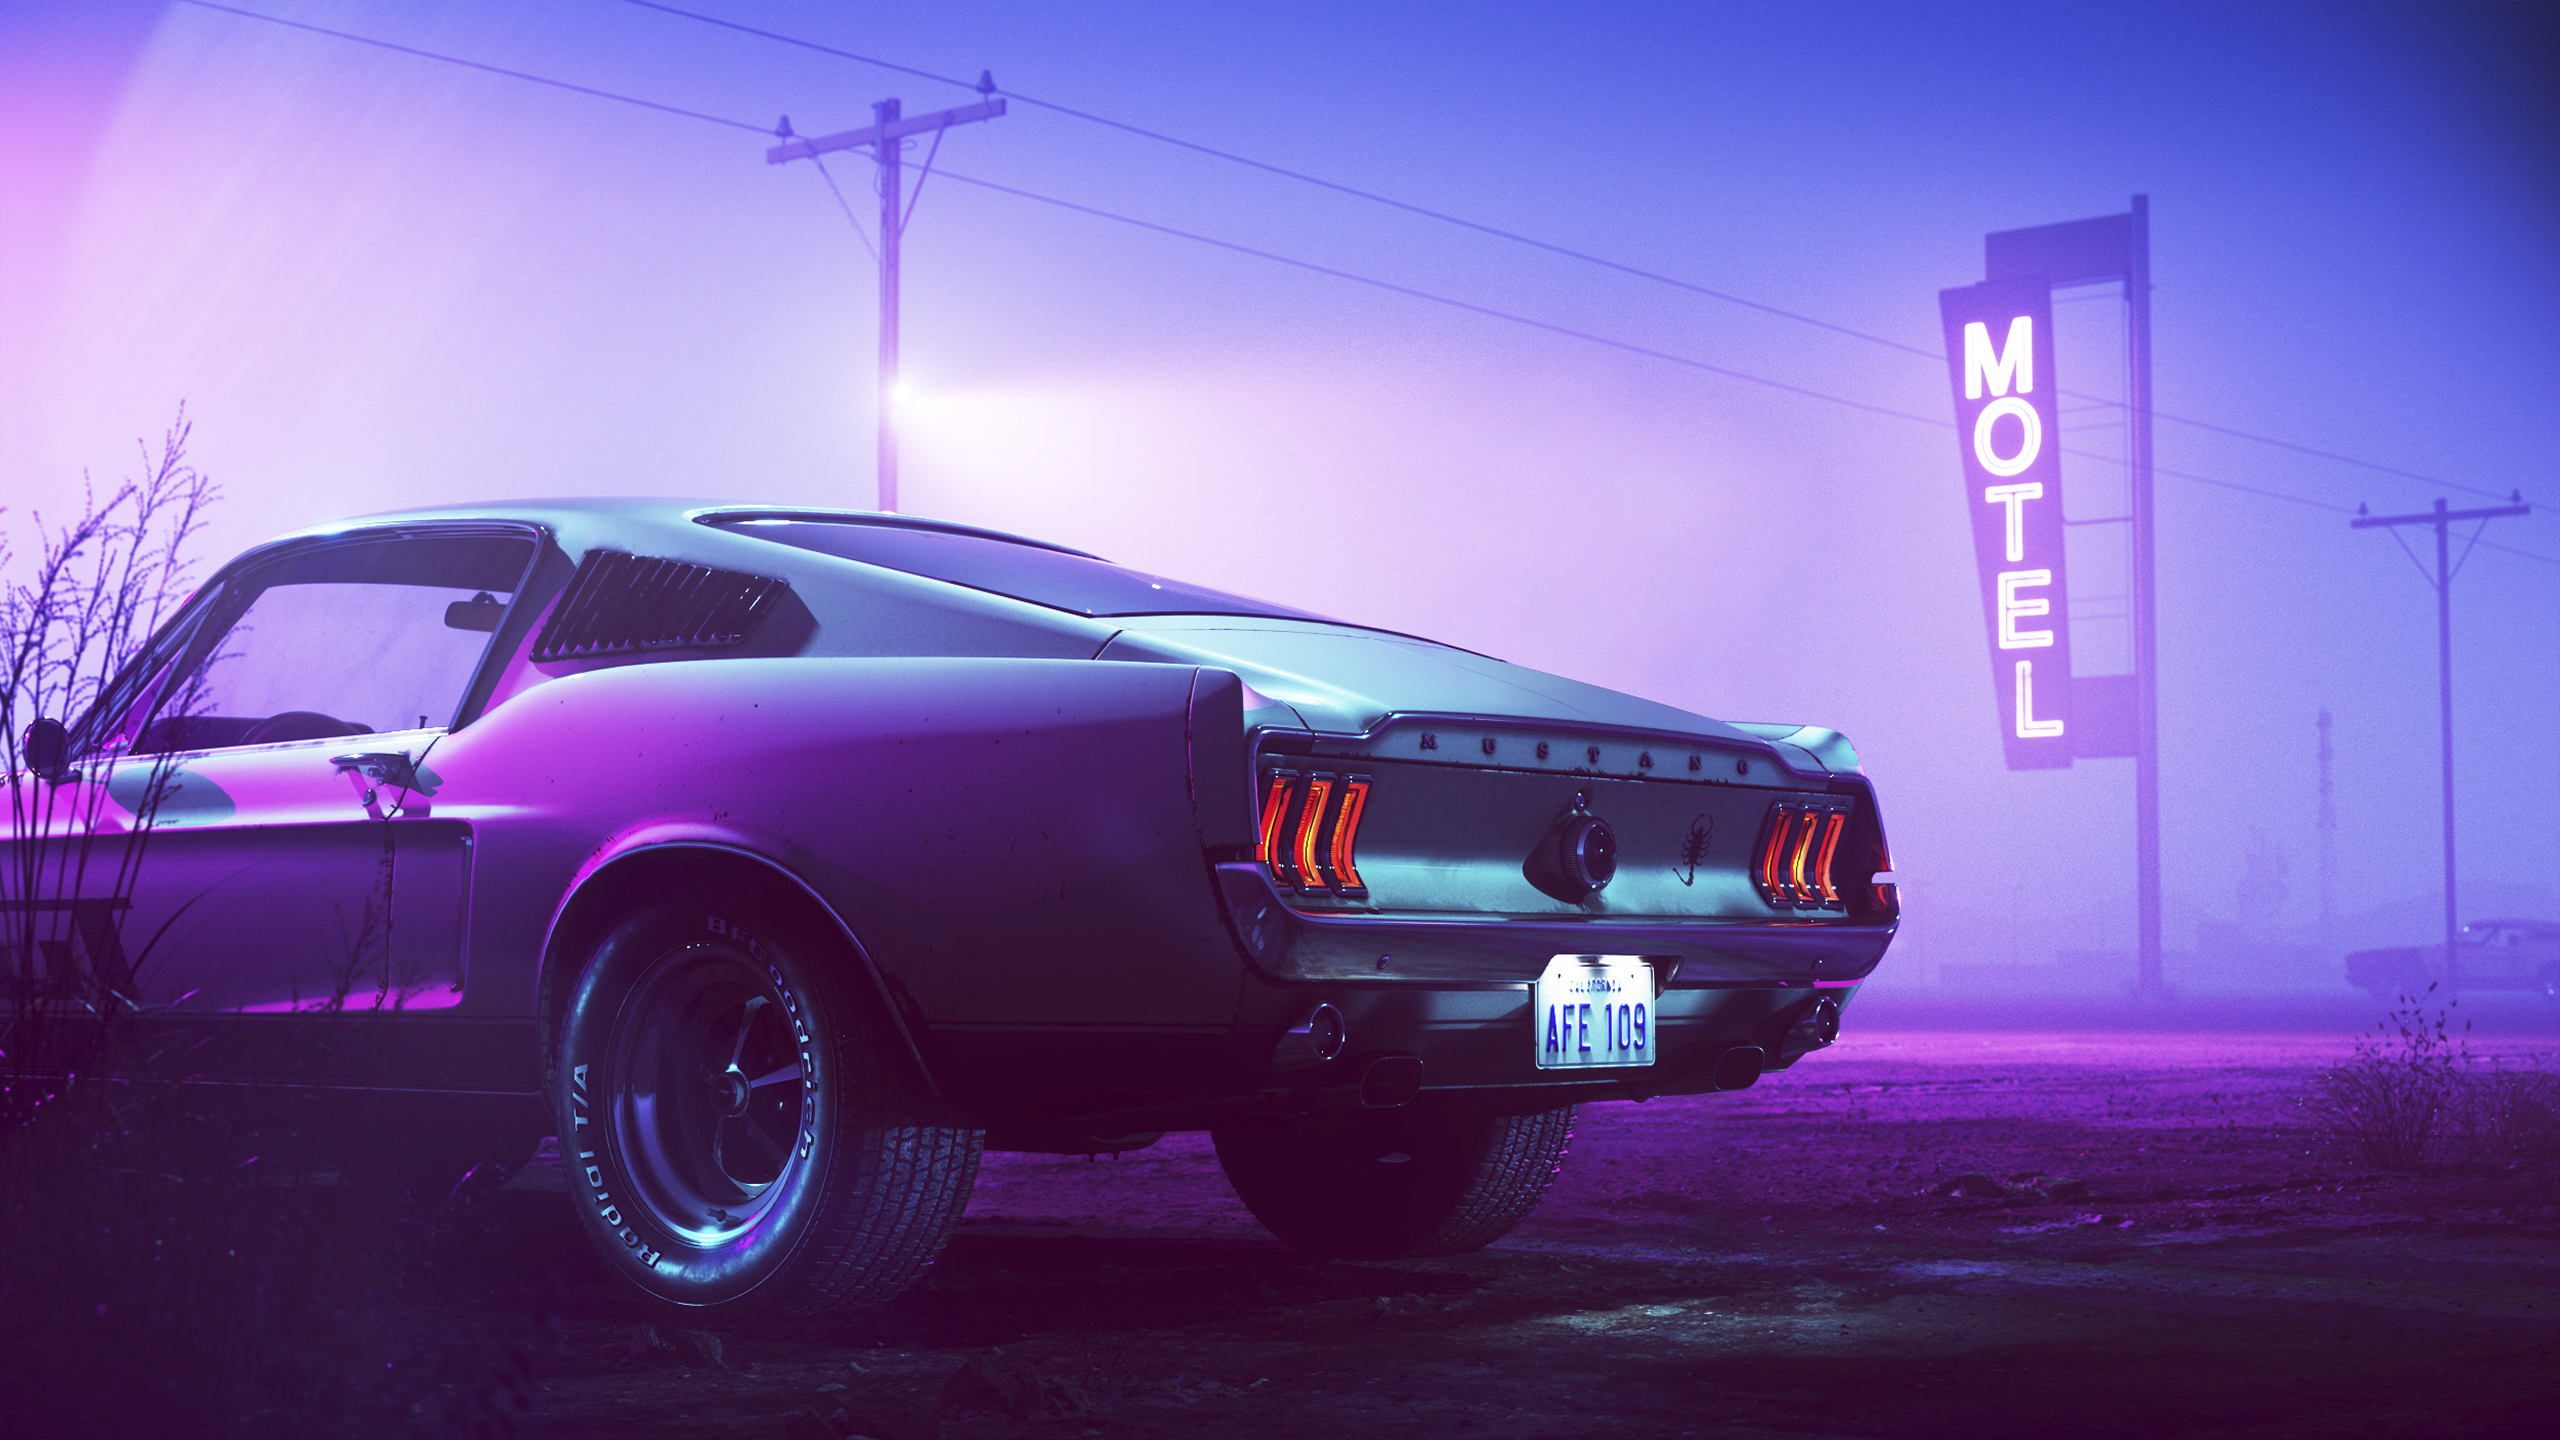 Retrowave Neon Synthwave Vaporwave Ford Mustang Car Taillights Licence Plates 2560x1440